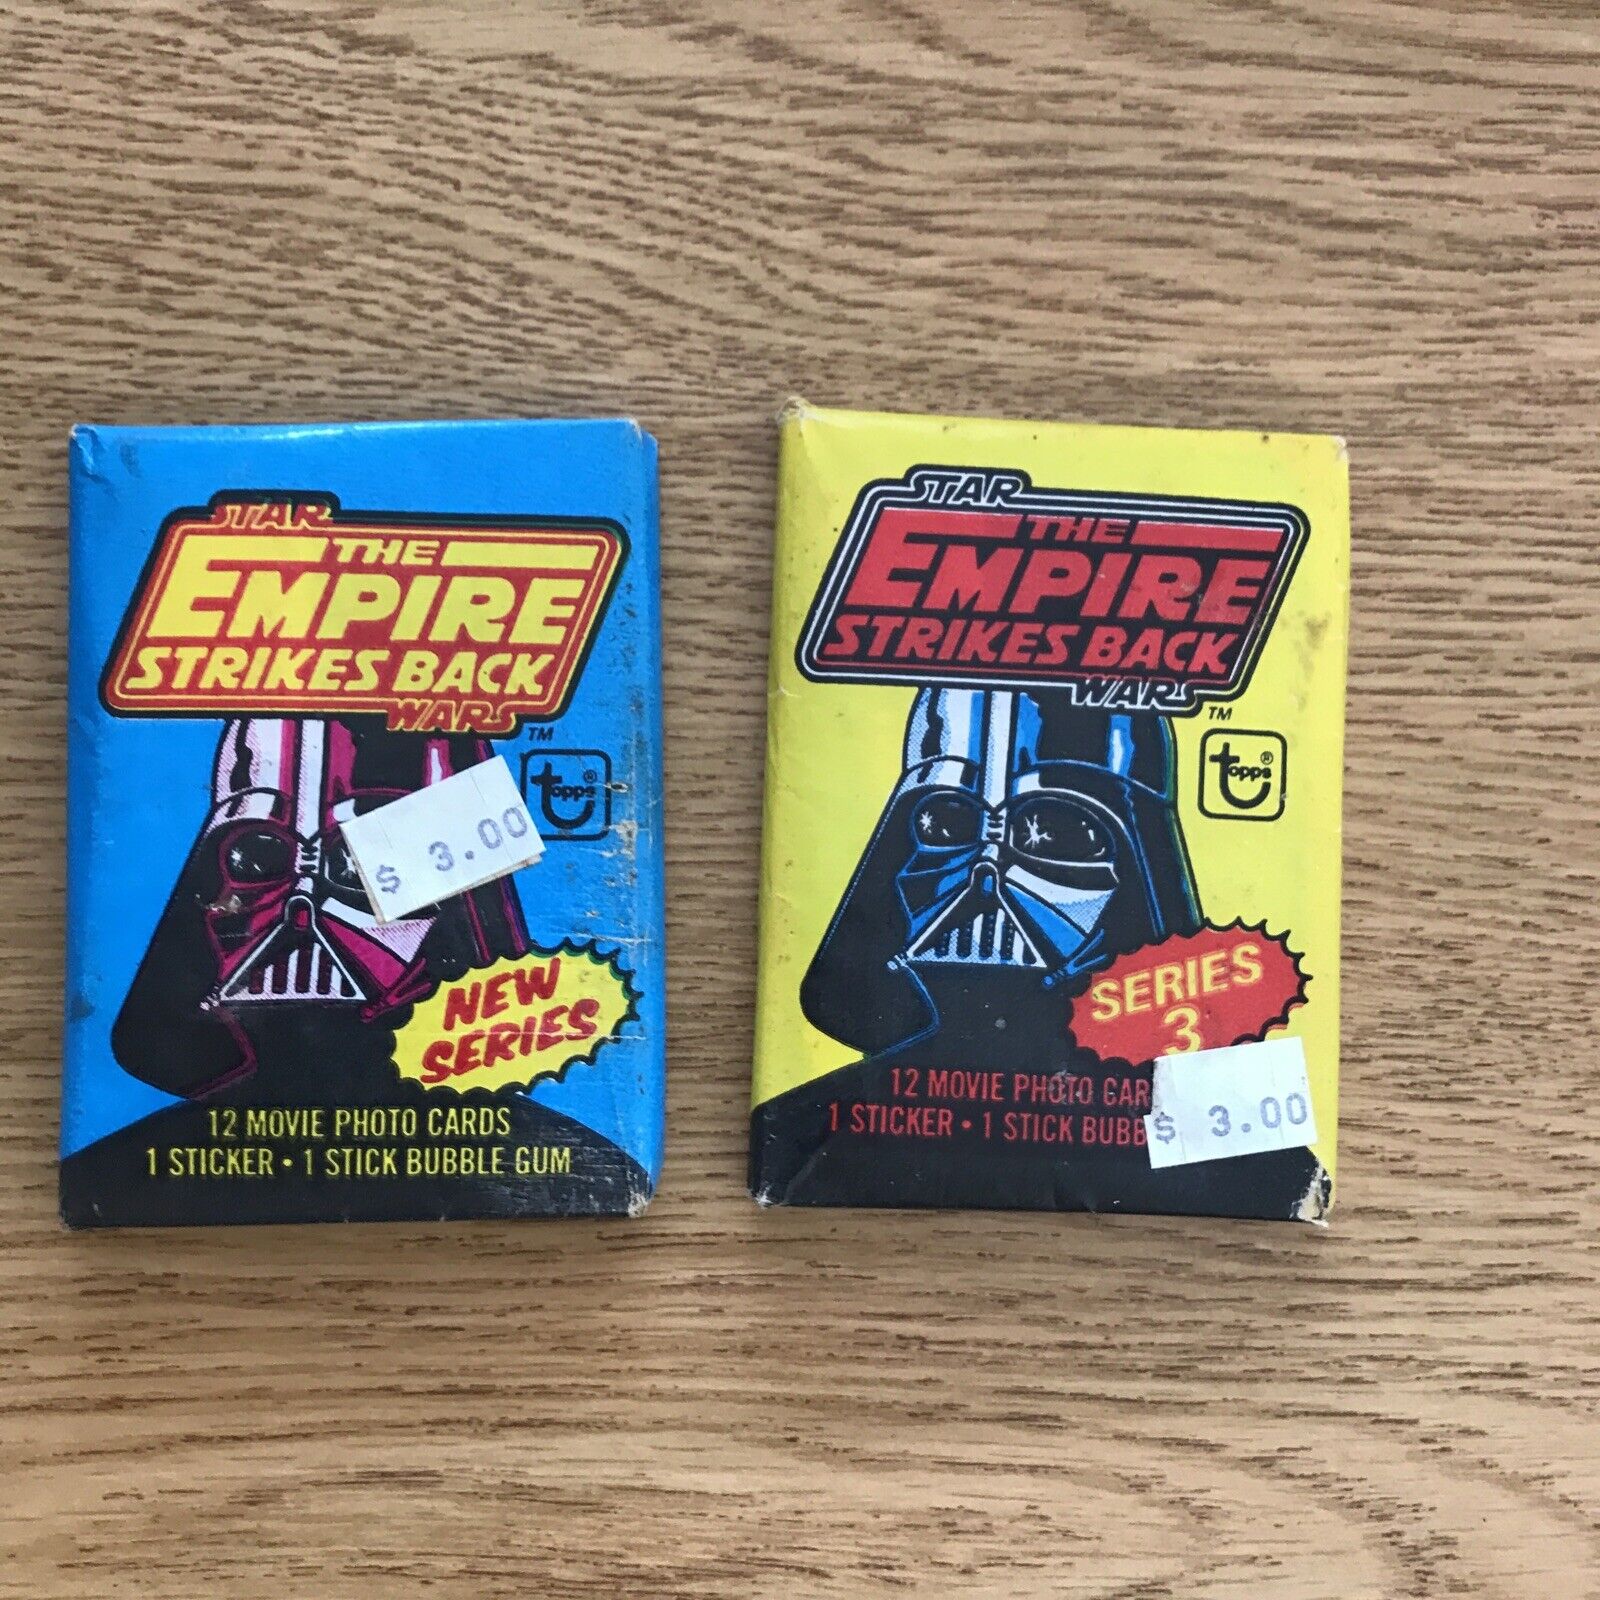 1980 Topps Empire Strikes Back Series 2 & 3 Wax Pack Lot